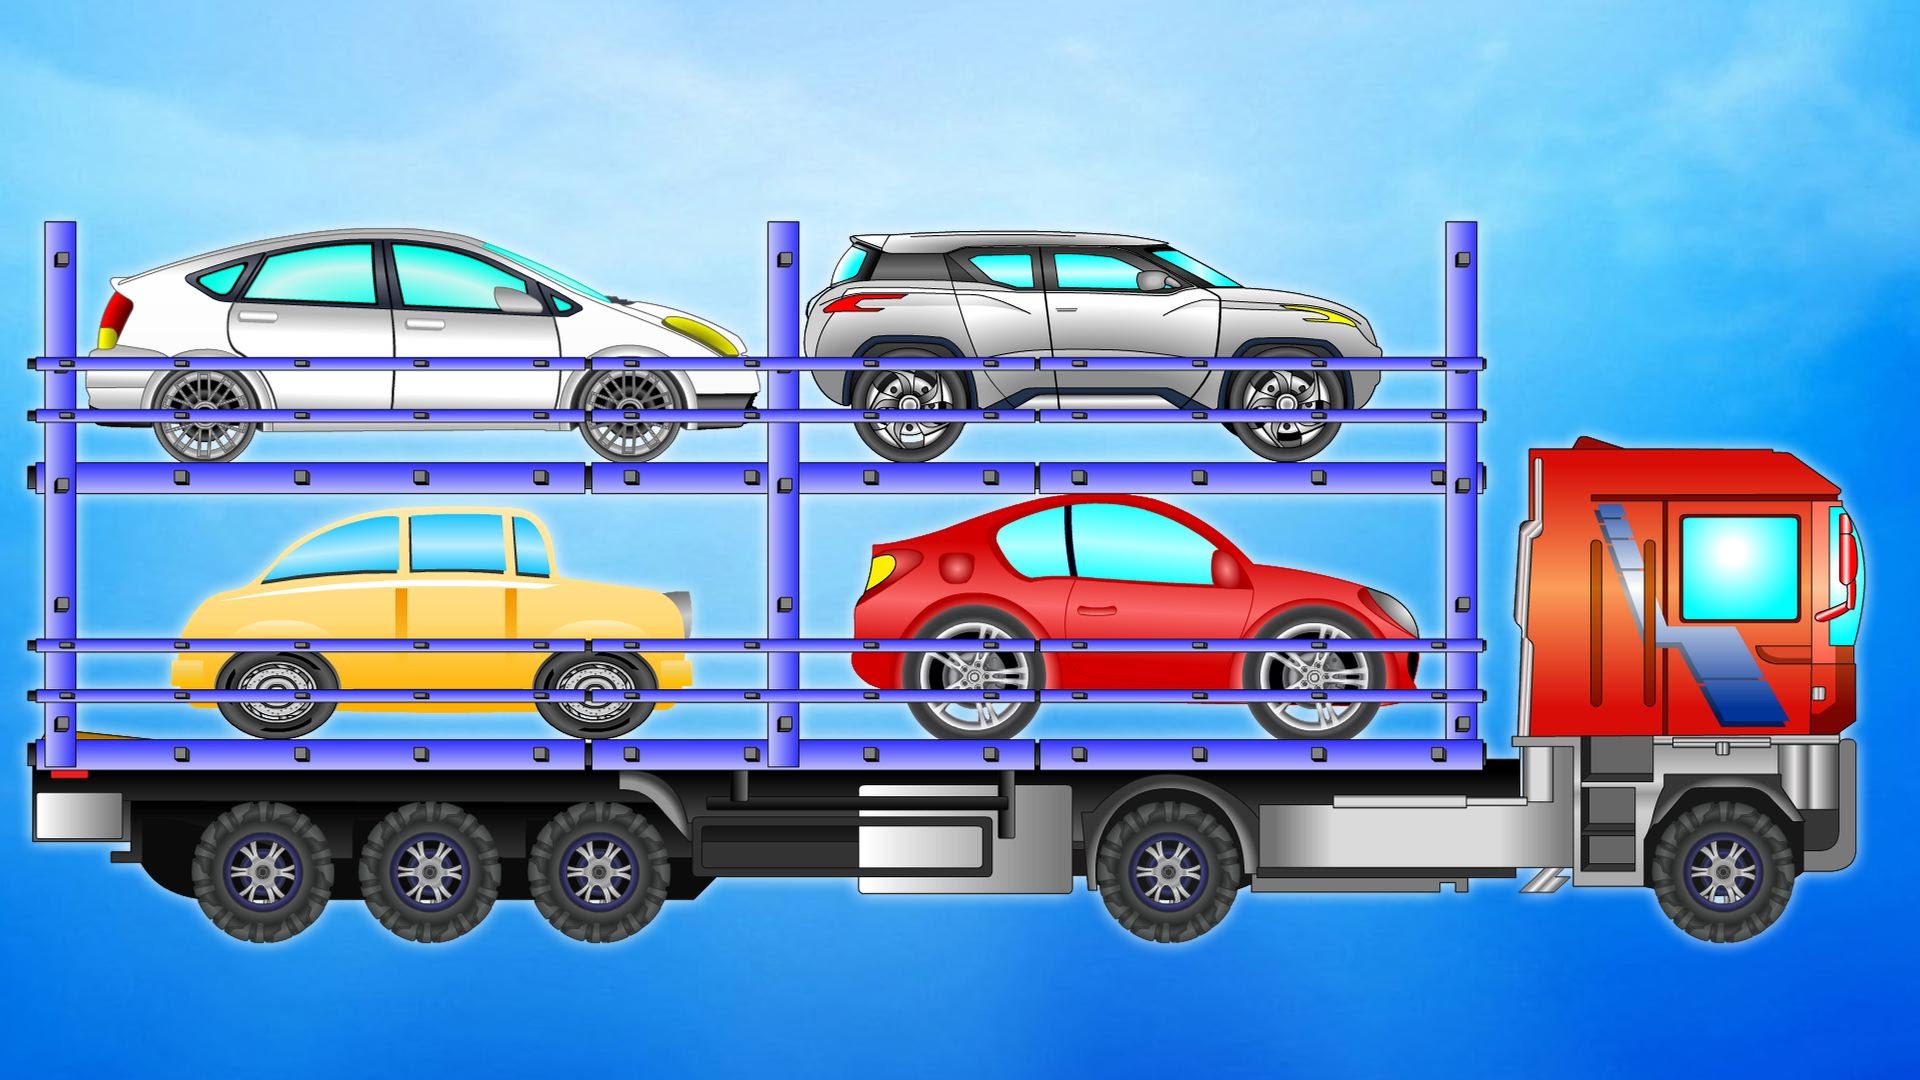 Auto Transport Truck | Learn Vehicles | Car Transporter Car Toys ...